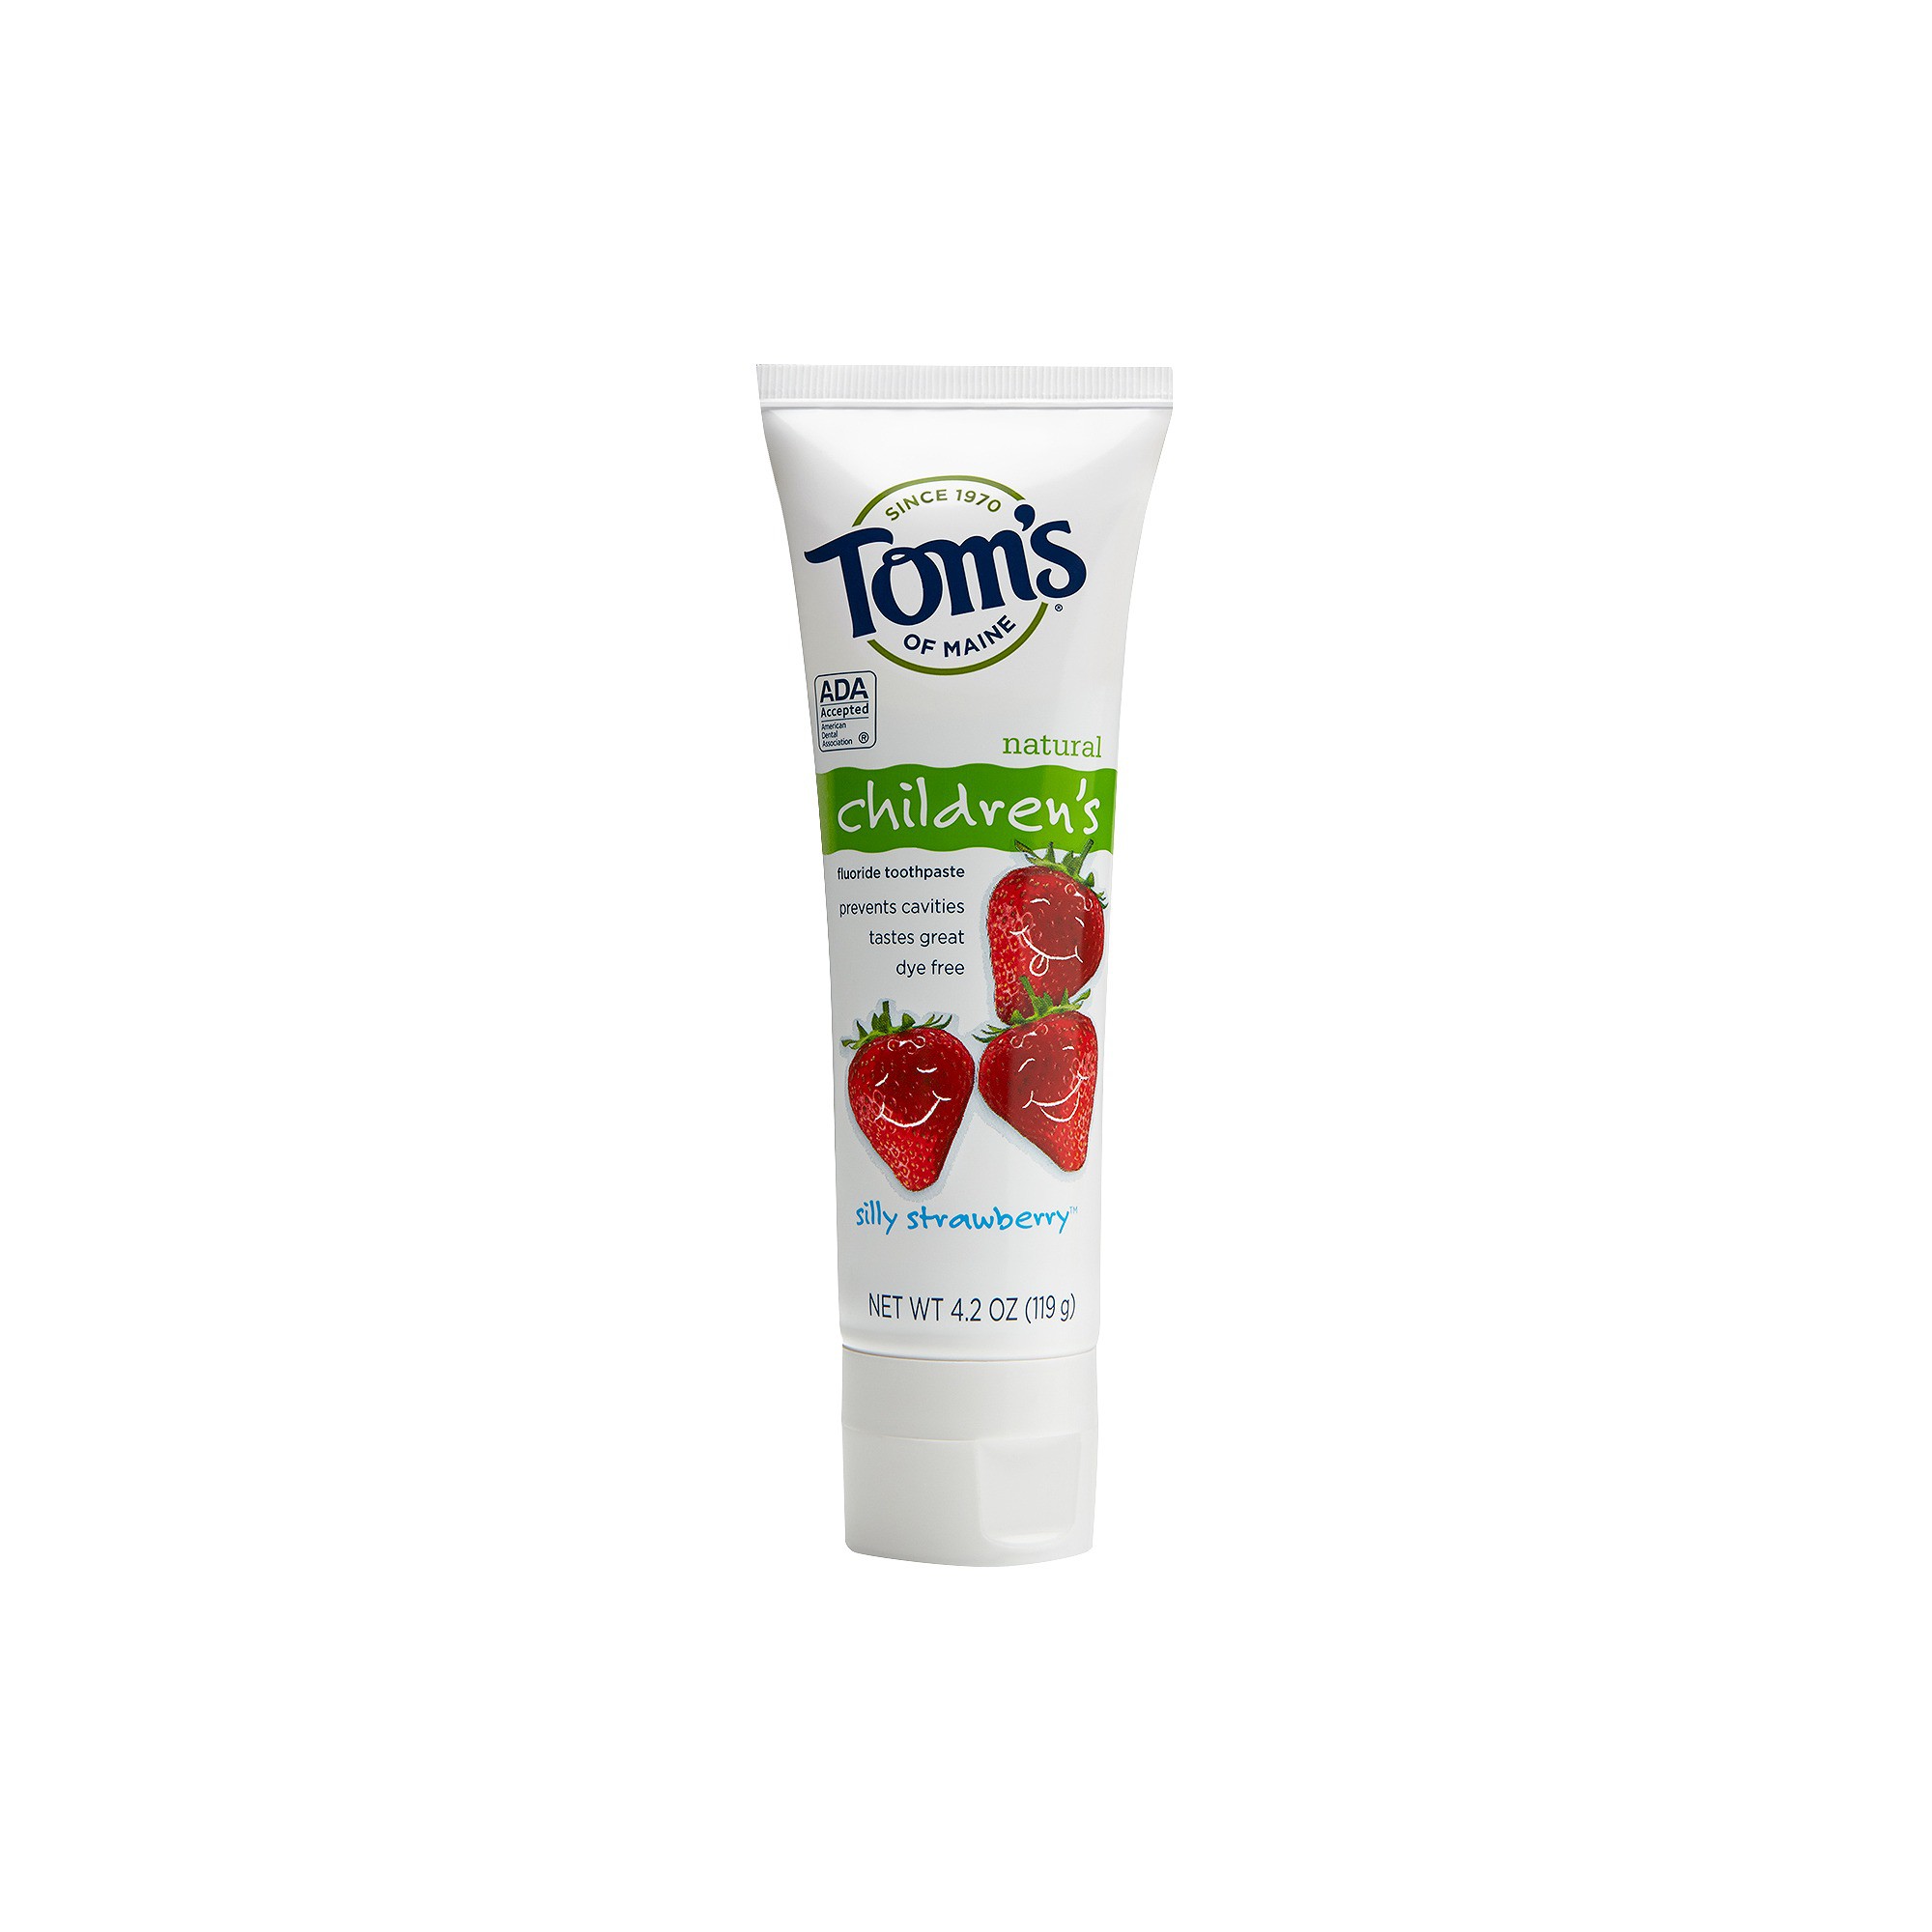 Tom's of Maine Silly Strawberry Anticavity Fluoride Natural Kids Toothpaste - 4.2oz